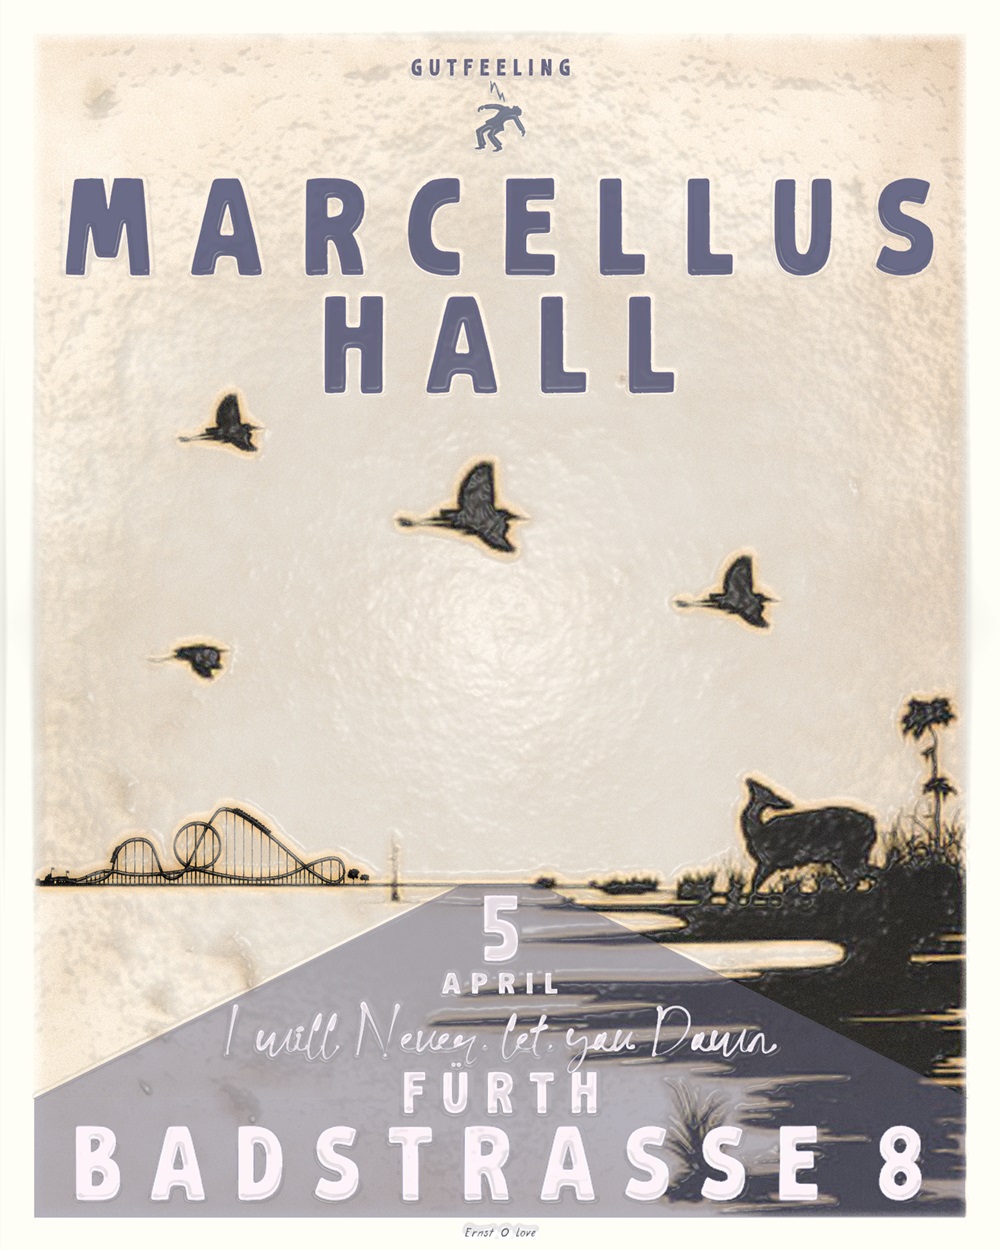 Marcellus Hall won't let you down in Europe 1